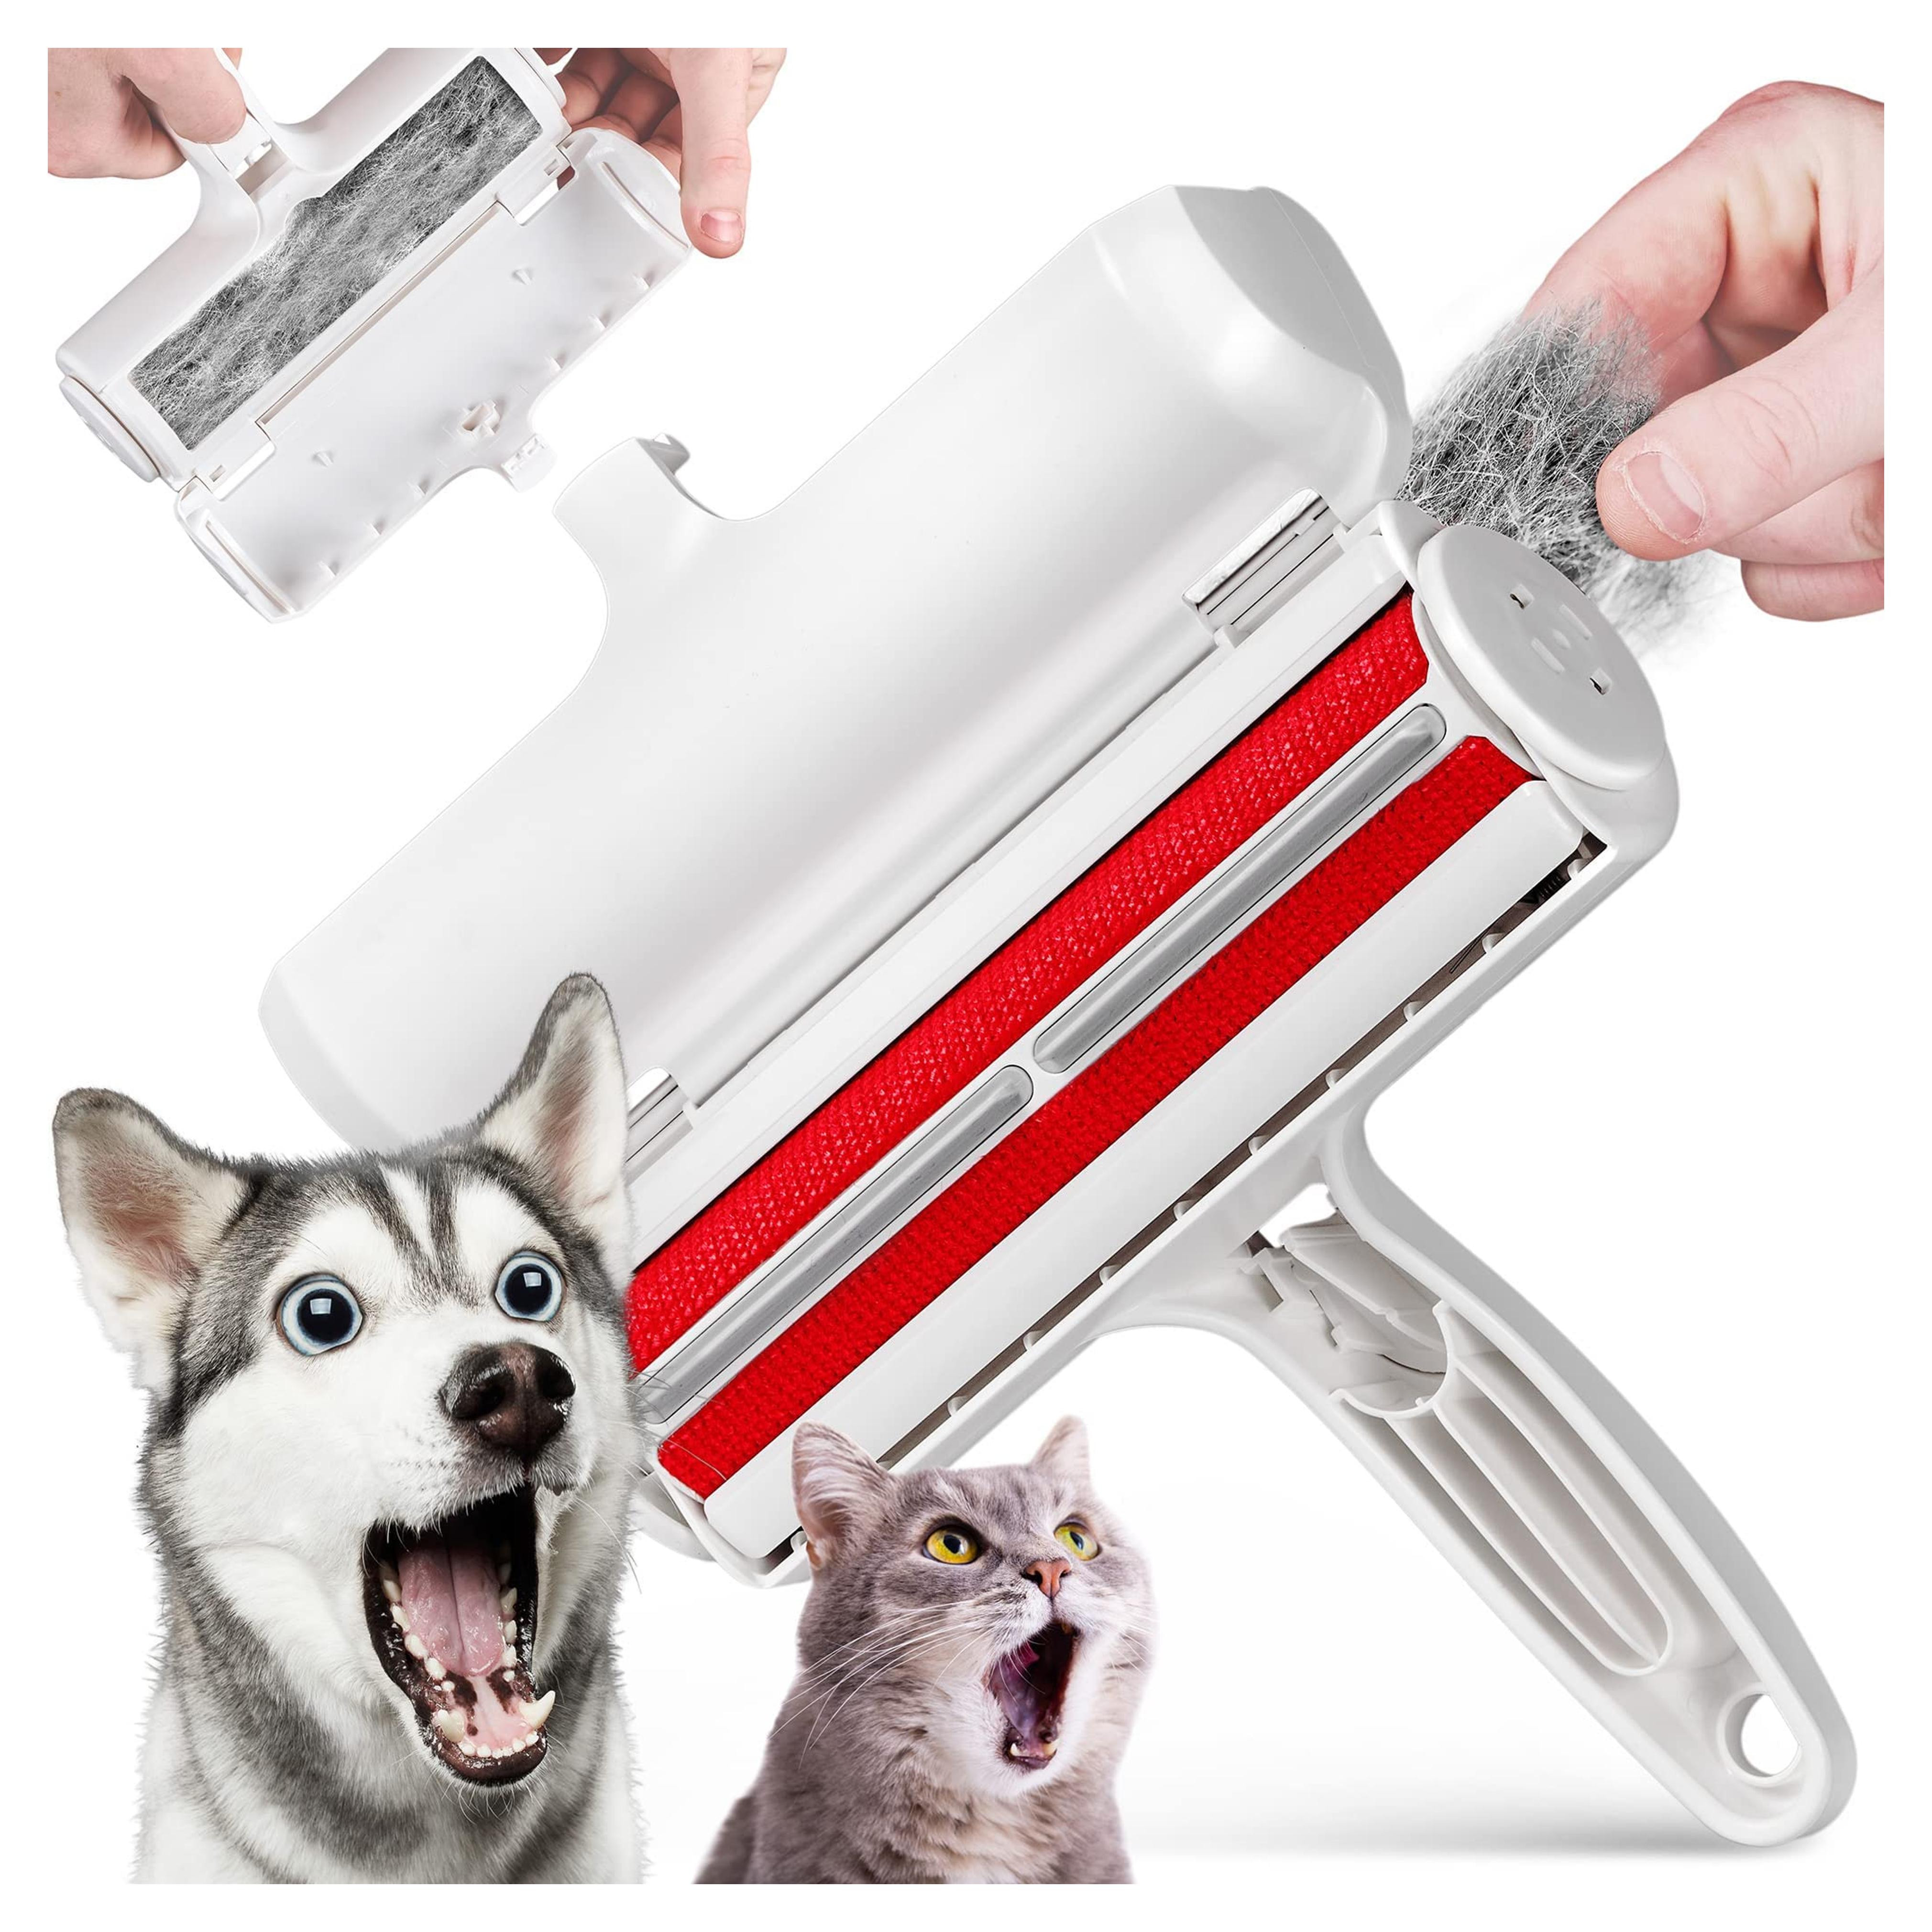 Lint Removers : Amazon.com: ChomChom Pet Hair Remover - Reusable Cat and Dog Hair Remover for Furniture, Couch, Carpet, Car Seats and Bedding - Eco-Friendly, Portable, Multi-Surface Lint Roller & Animal Fur Removal Tool